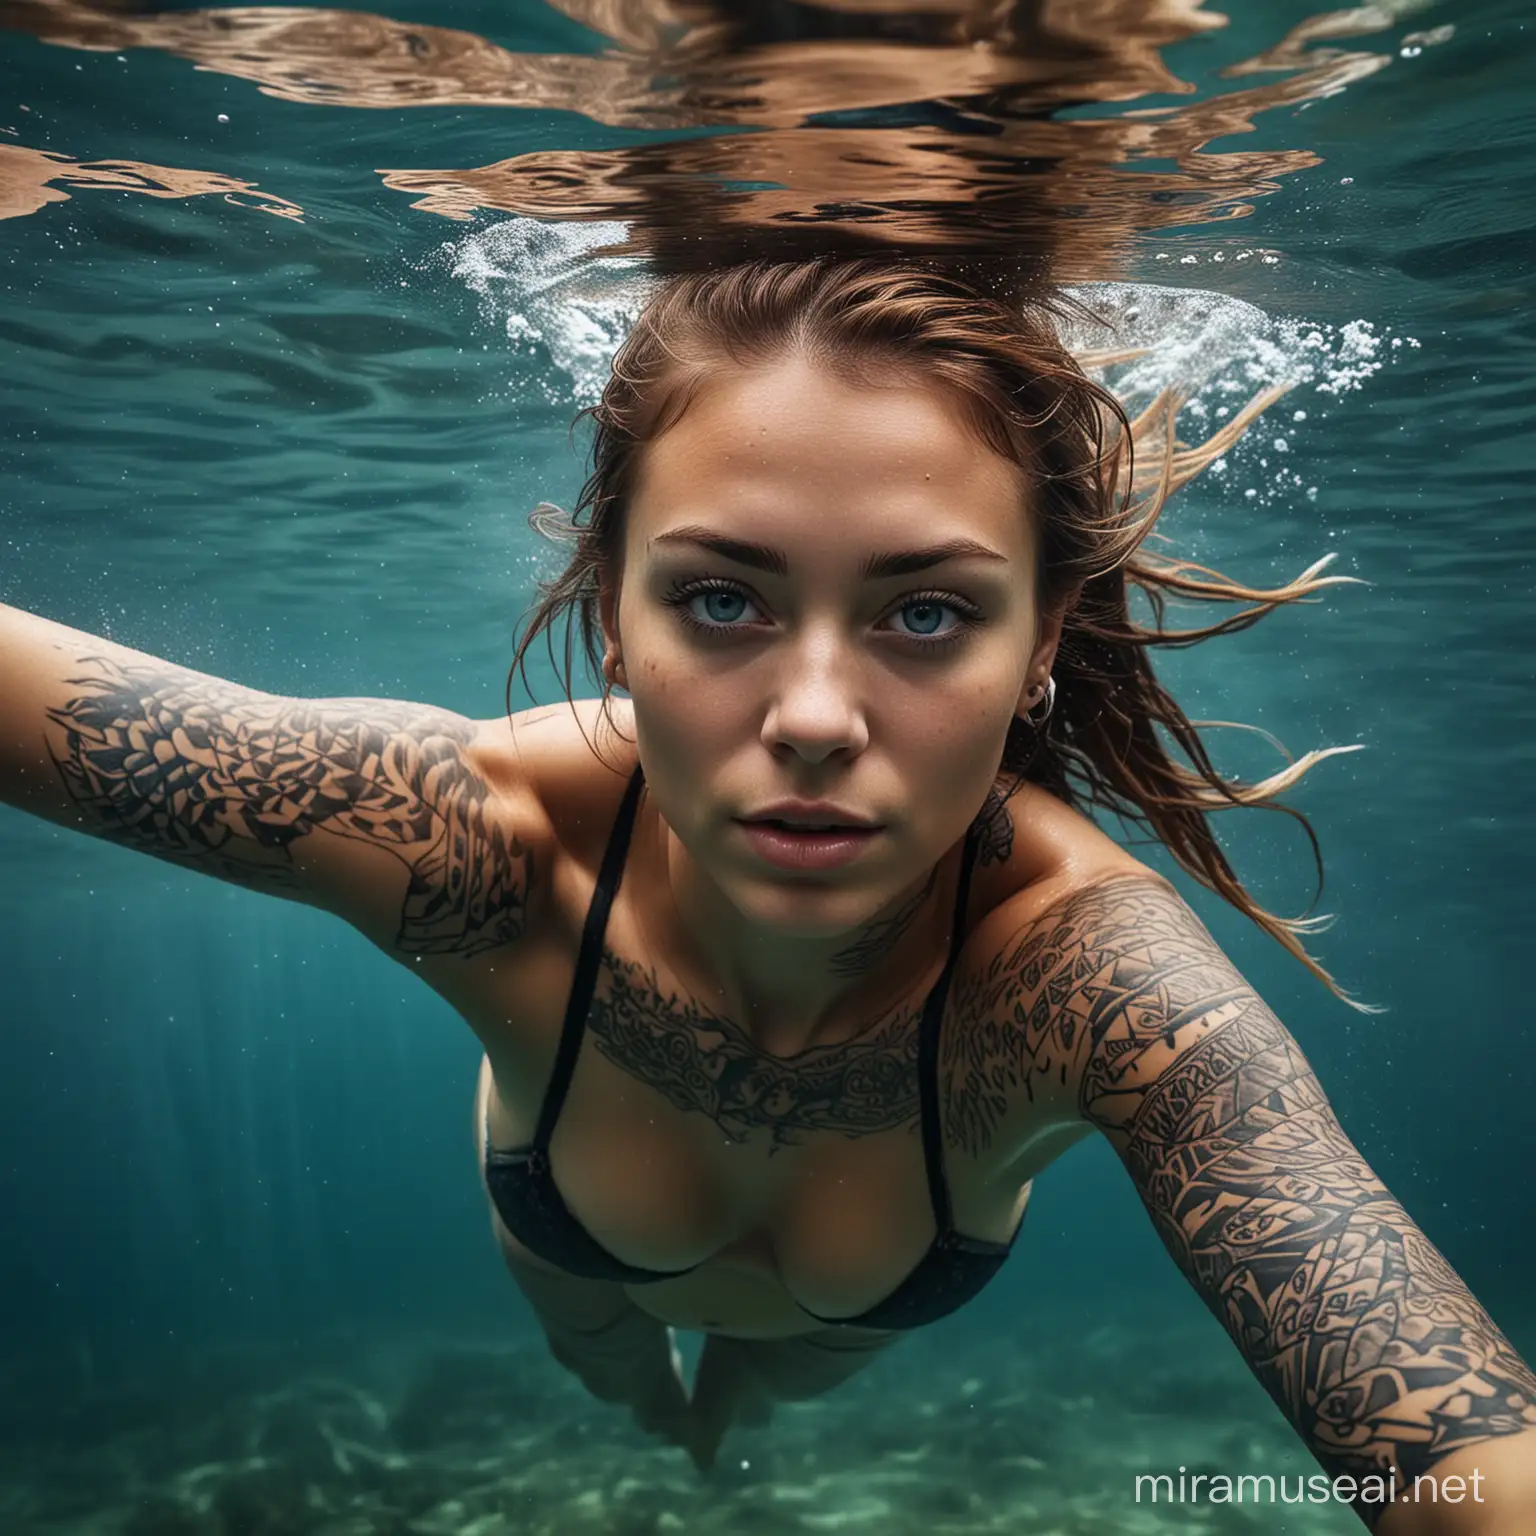 Stunning Underwater Portrait of a Tattooed Tribal Woman with Brown Hair and Blue Eyes